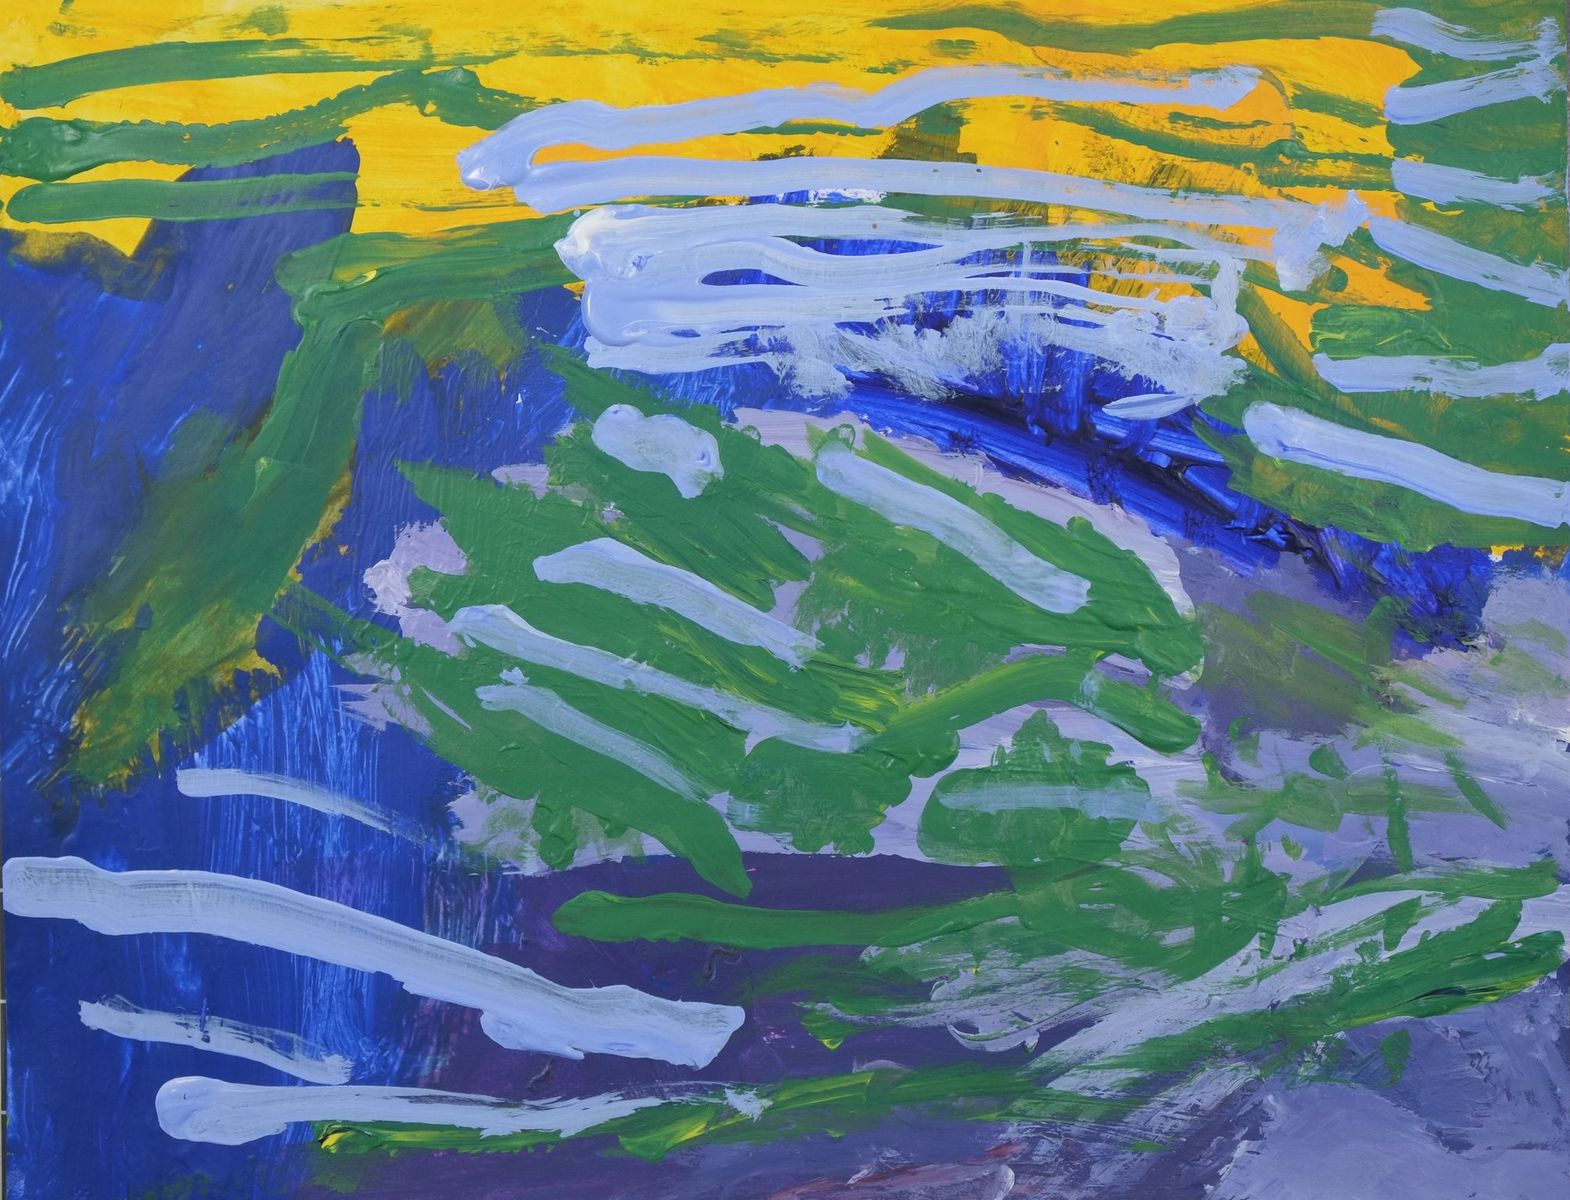 Acrylic on paper artwork with a yellow, blue and purple background with horizontal lavender and green paint streaks over top